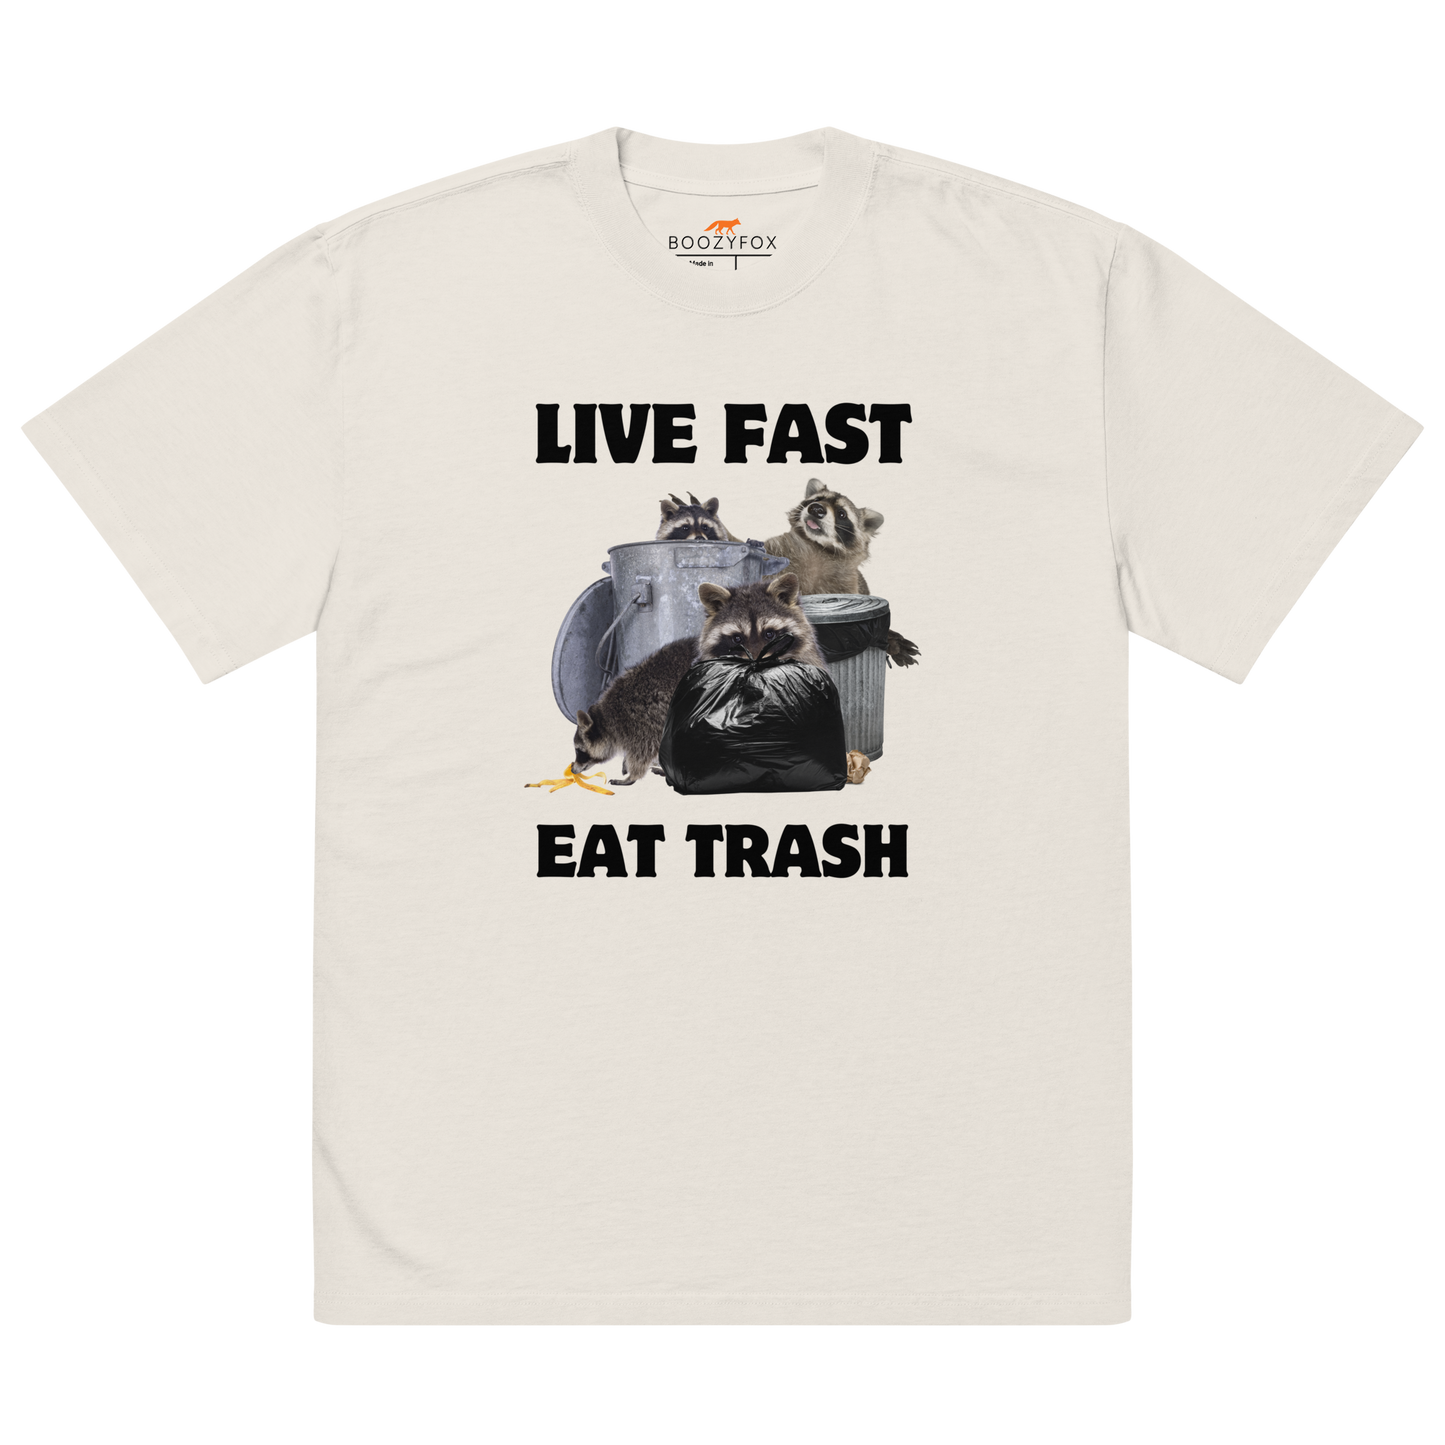 Faded Bone Raccoon Oversized T-Shirt featuring the bold Live Fast Eat Trash graphic on the chest - Funny Graphic Raccoon Oversized Tees - Boozy Fox